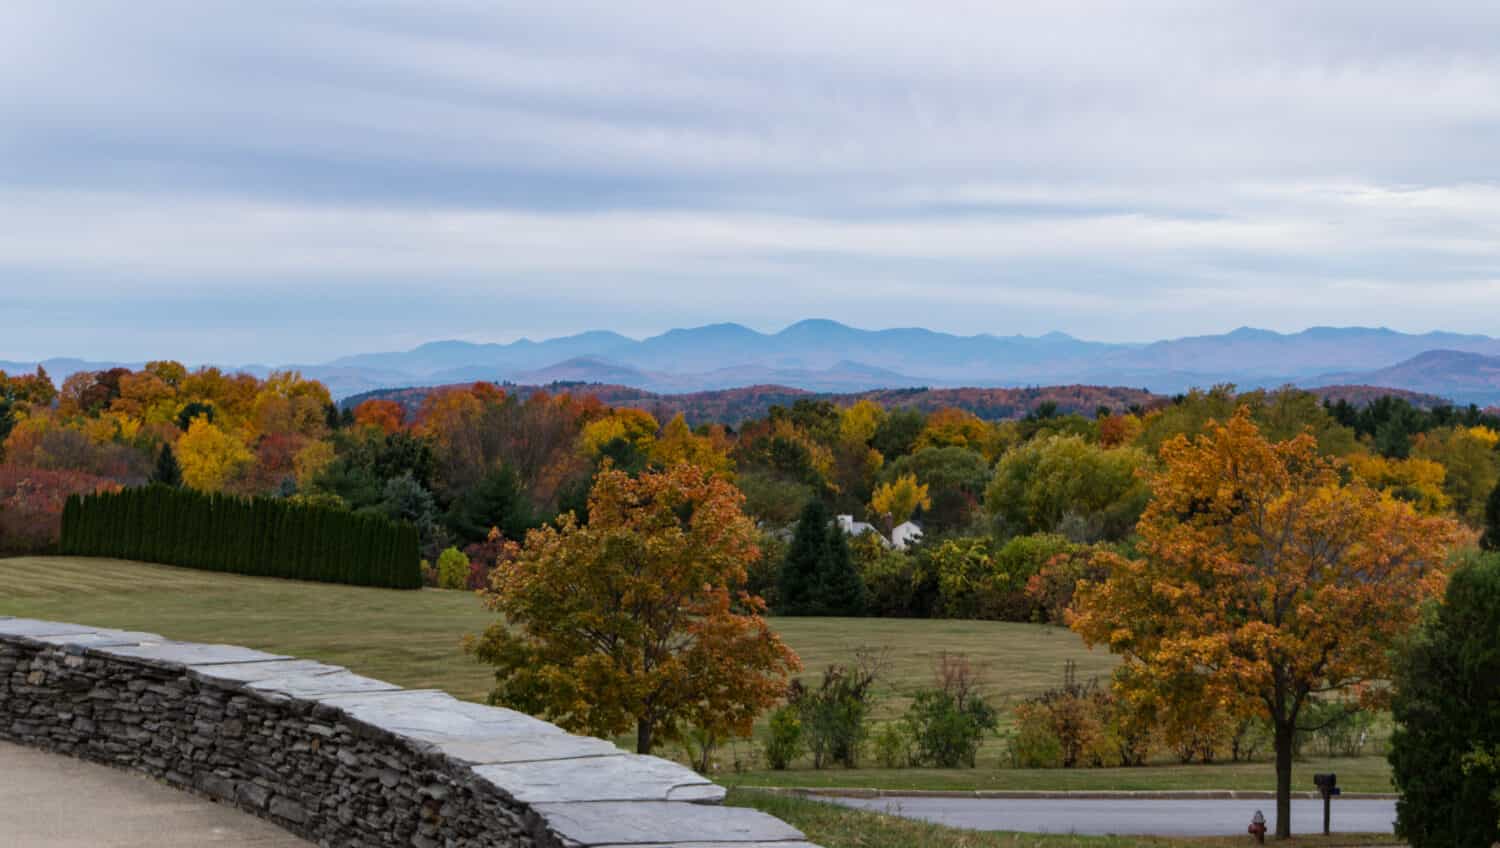 view of fall foliage and Adirondack Mountains in New York from Overlook Park in South Burlington, Vermont